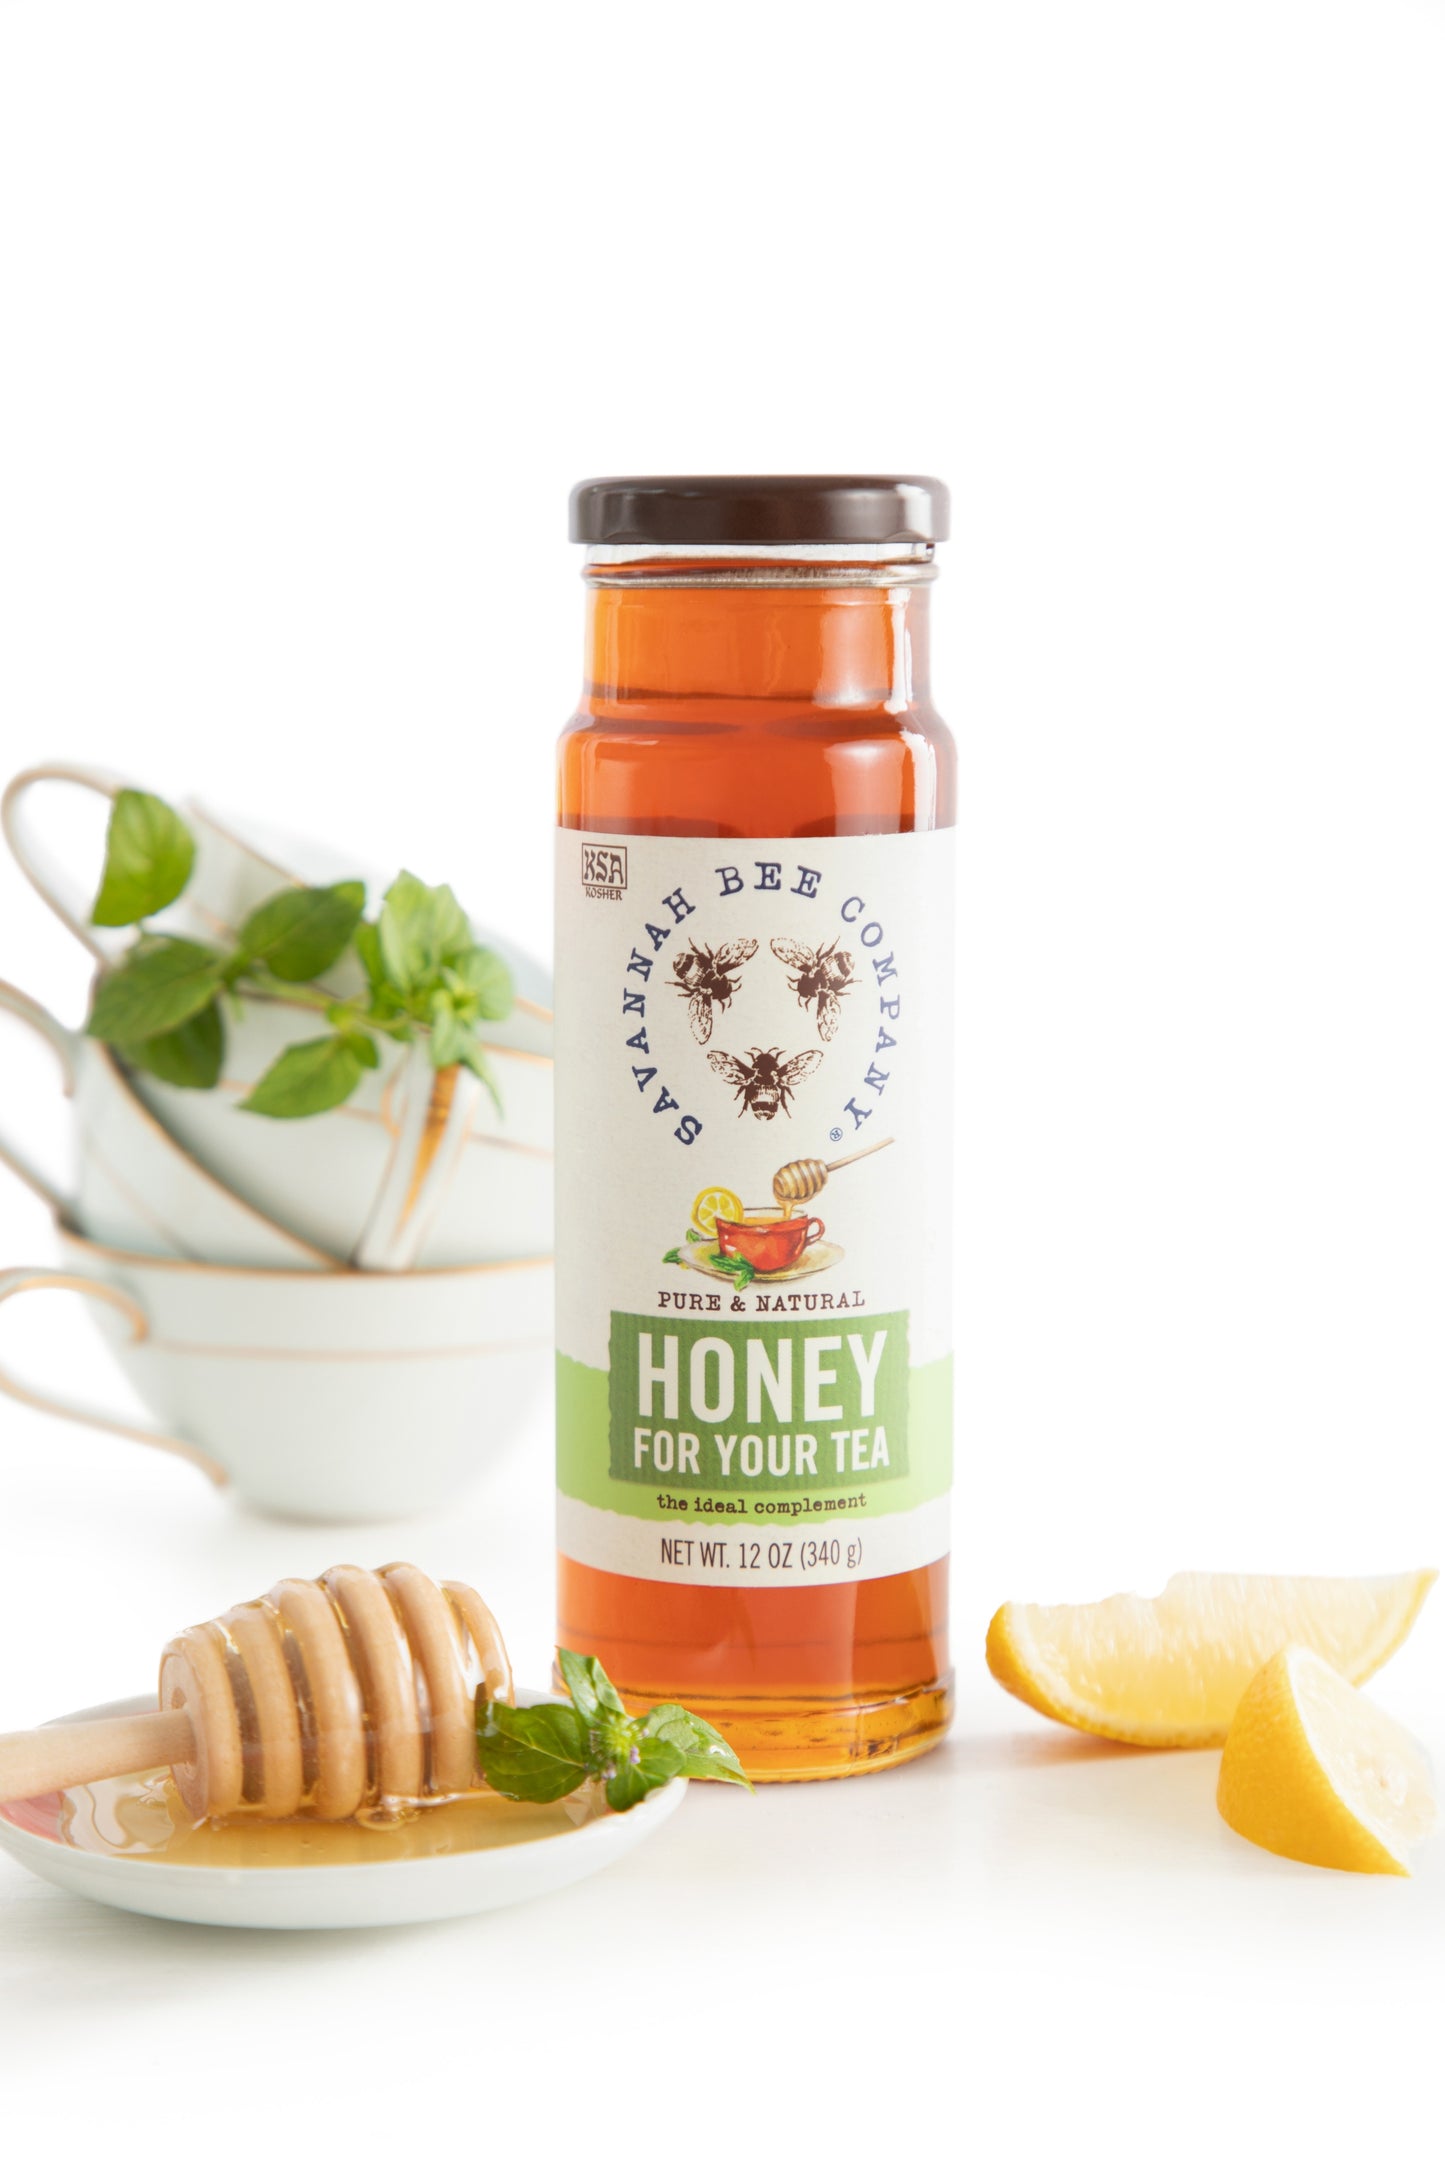 Honey for Tea, the ideal complement 12 oz. tower